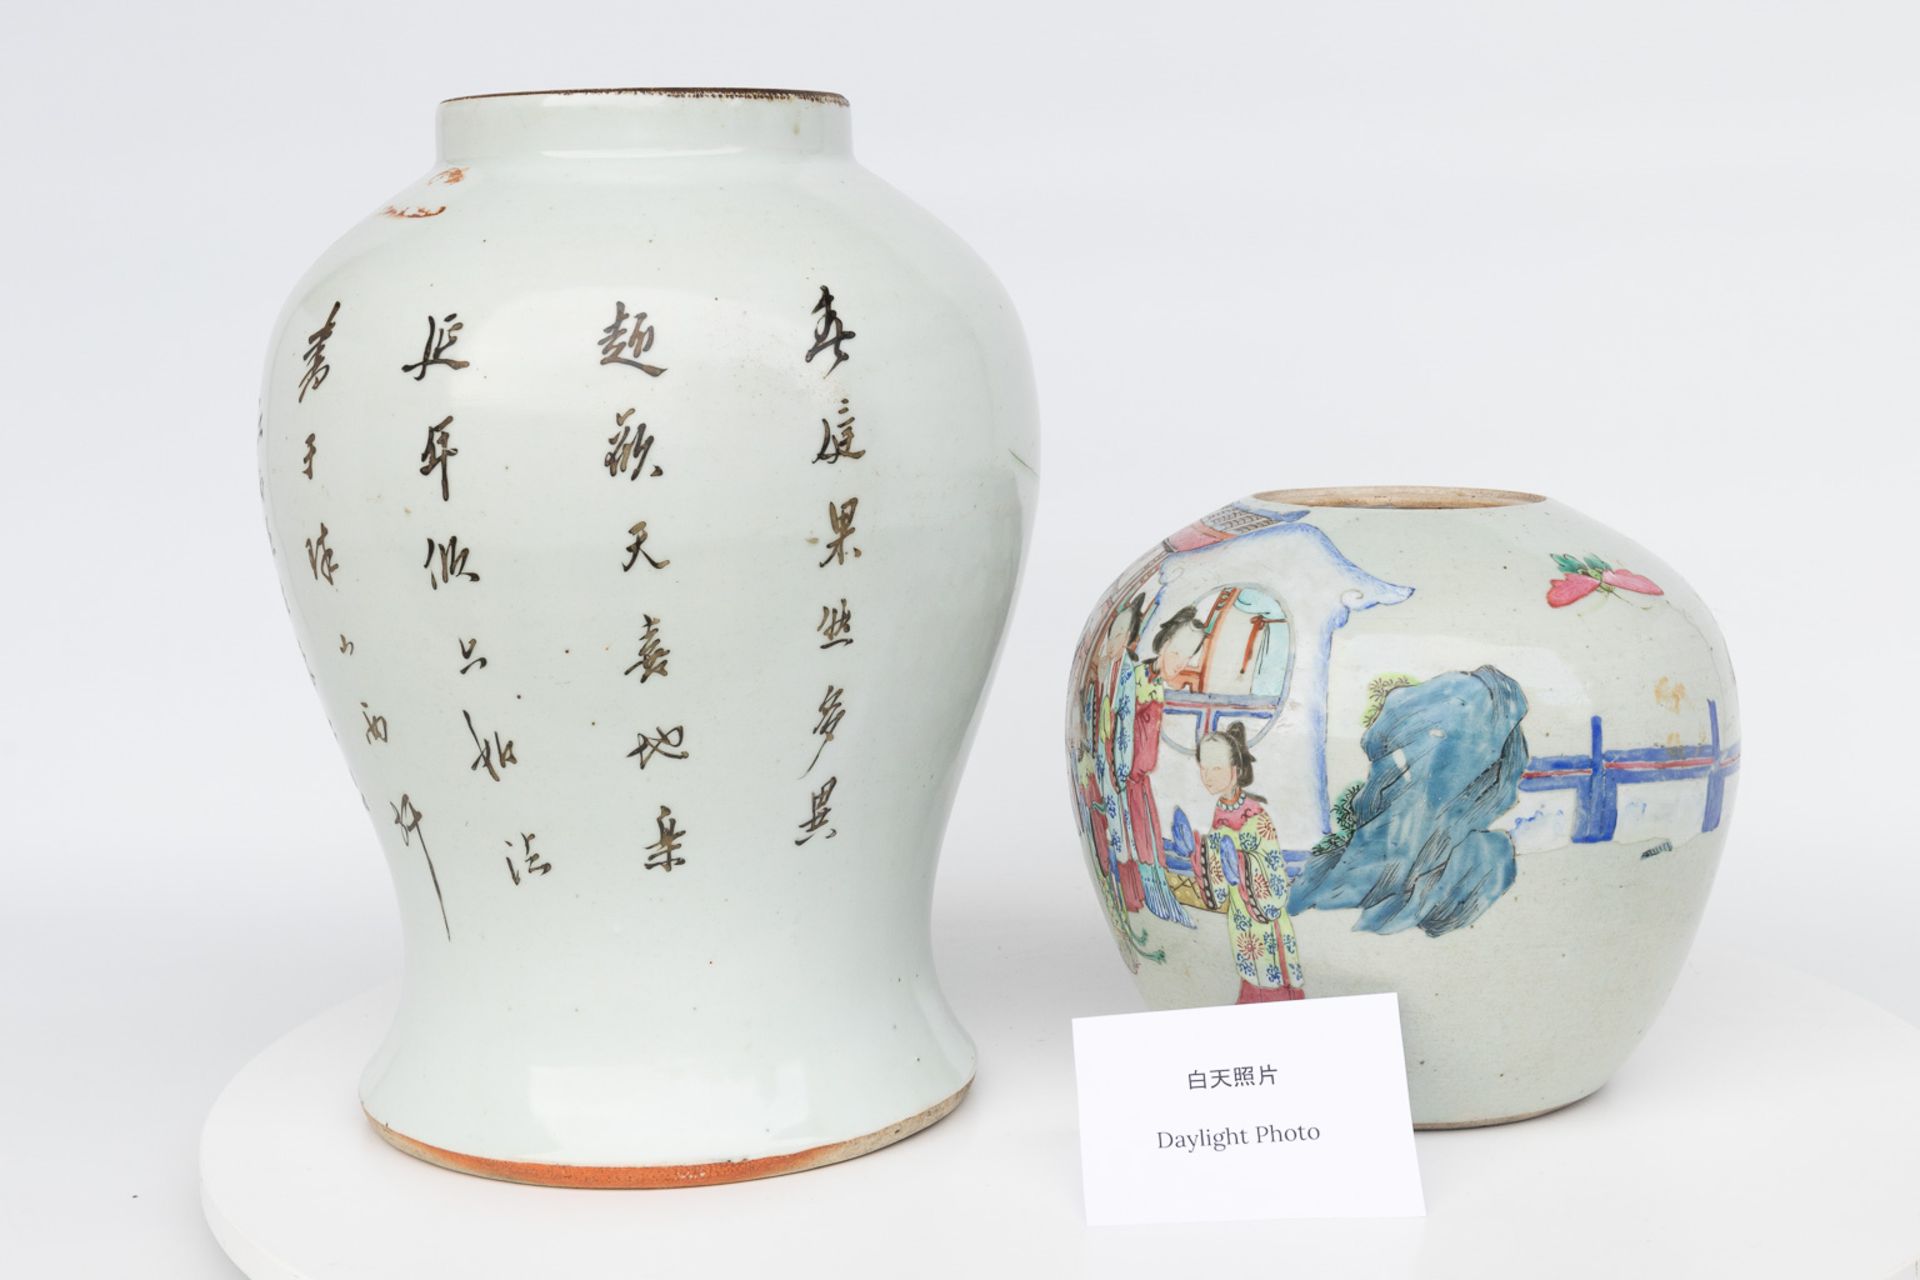 A set of 4 items made of Chinese porcelain. 2 small bowls and 2 ginger jars without lids. - Image 19 of 23